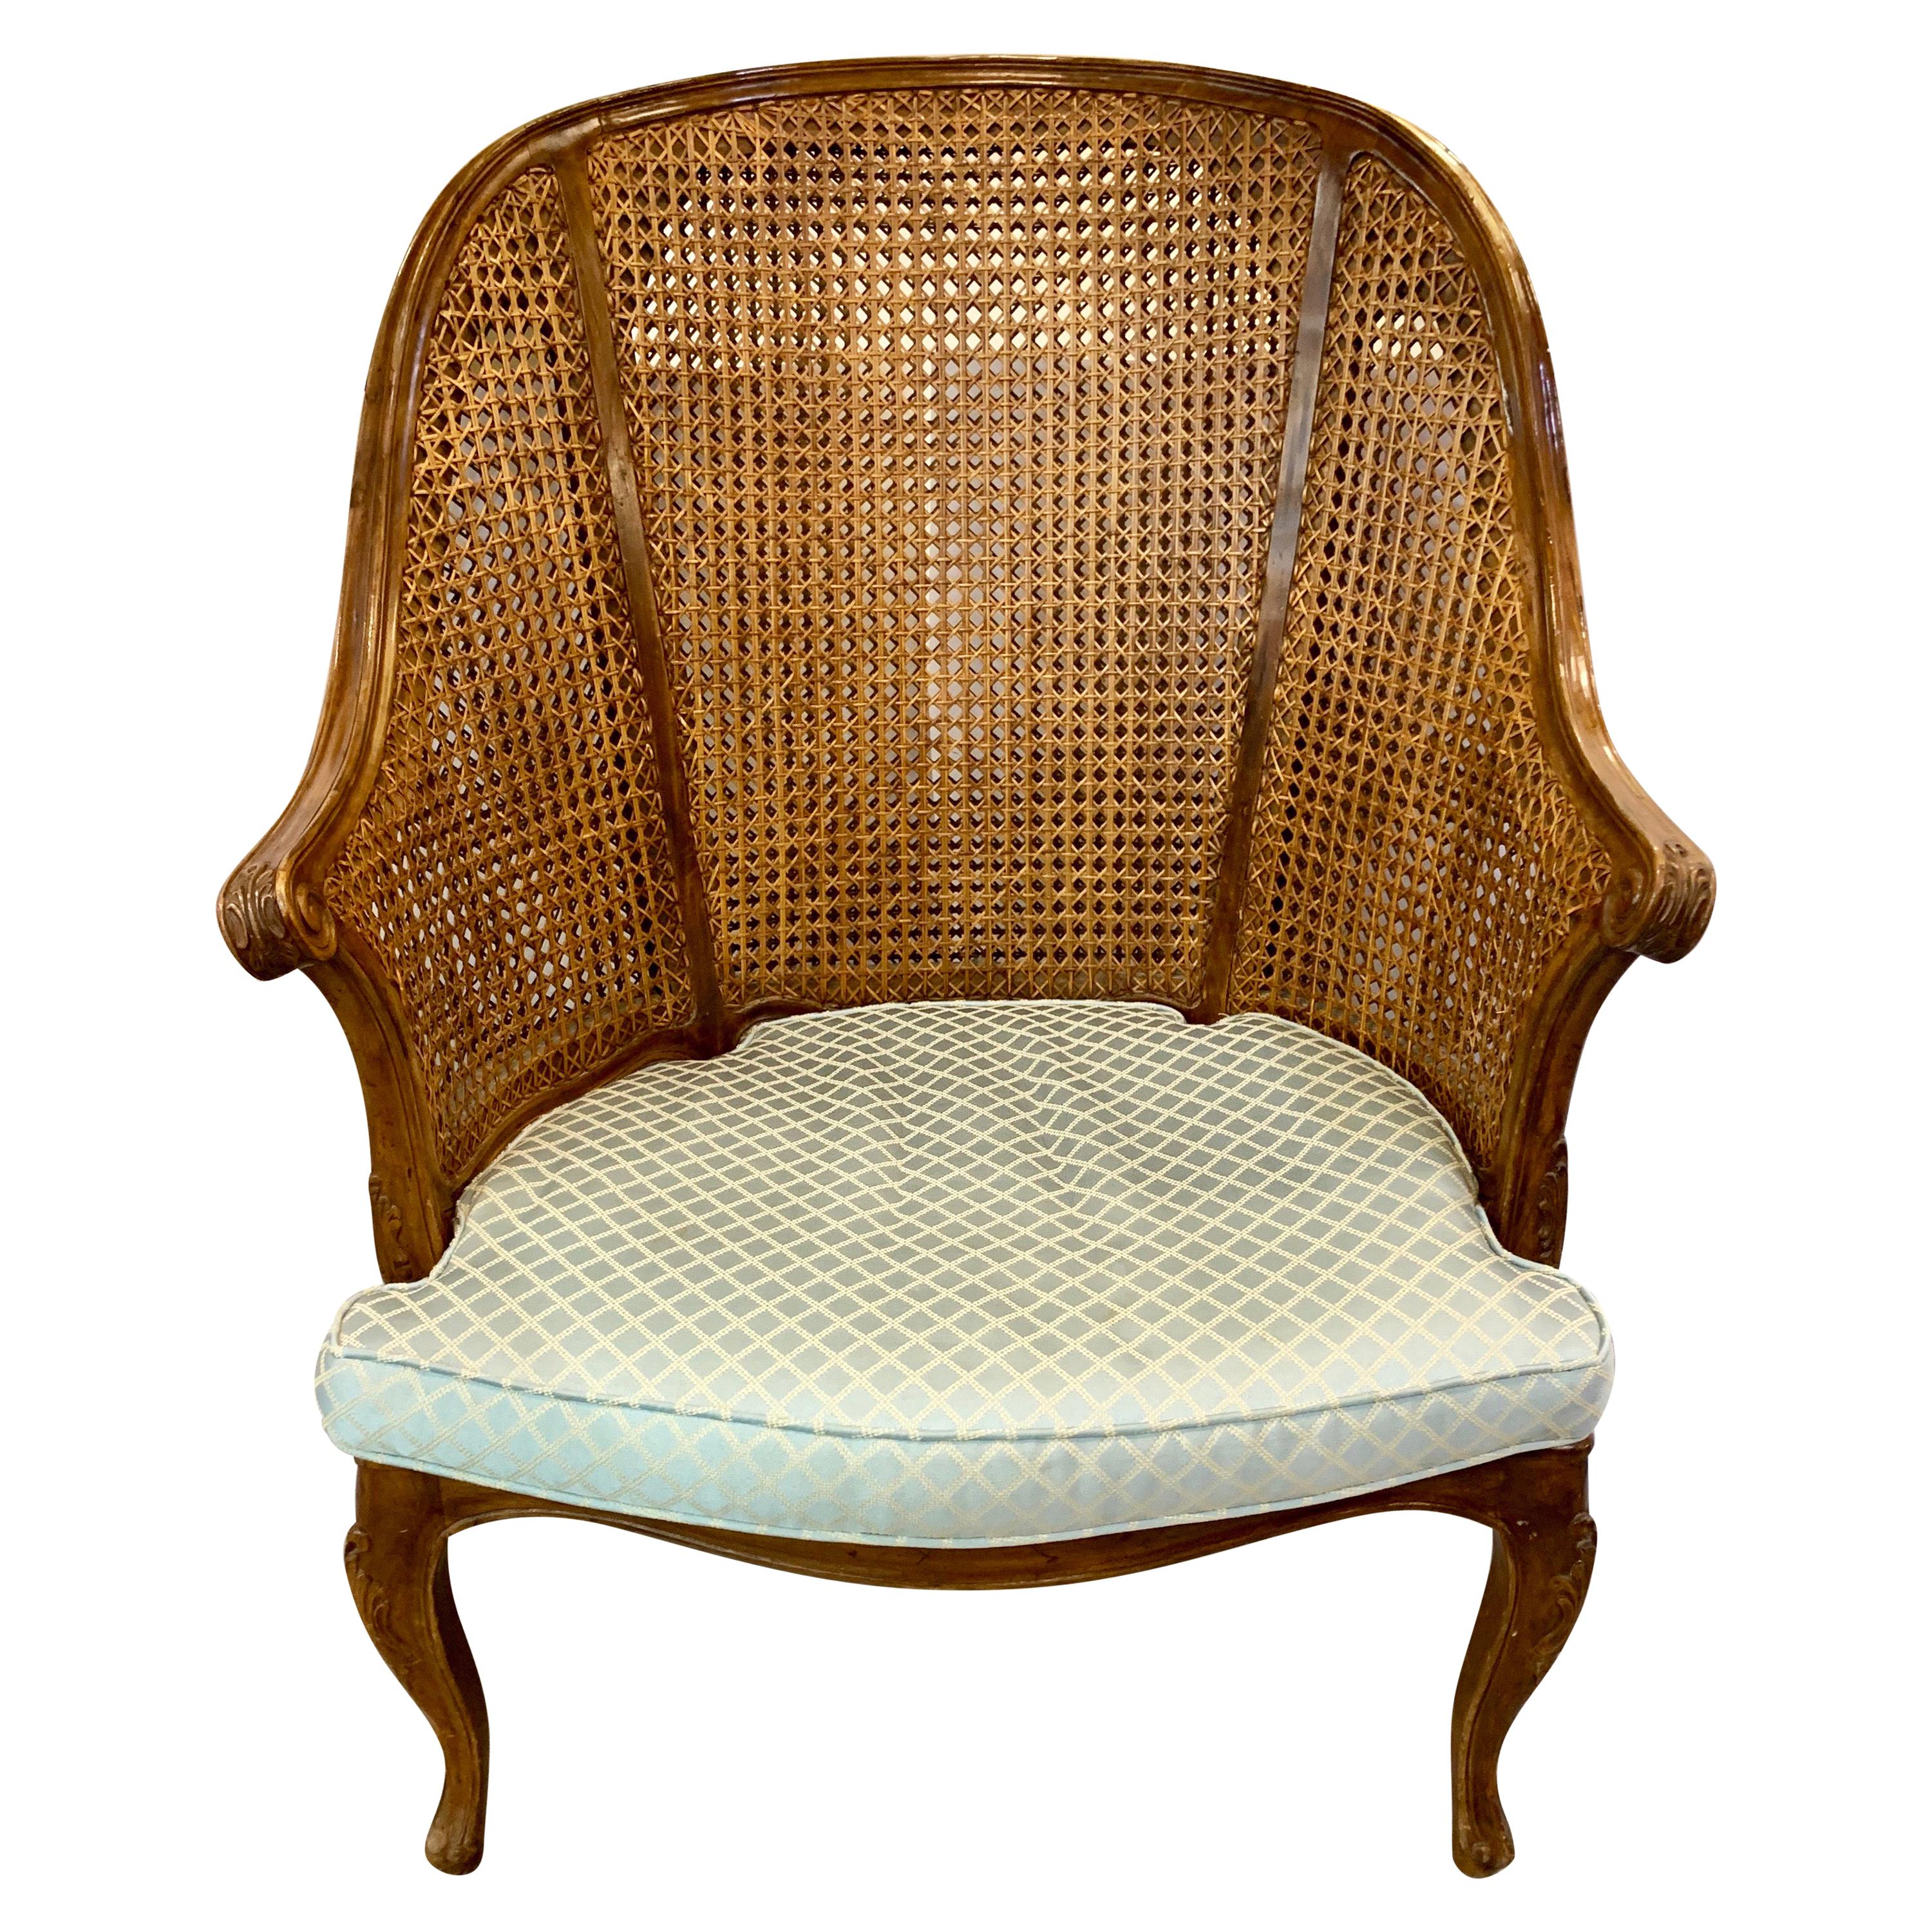 Antique French Cane Chair